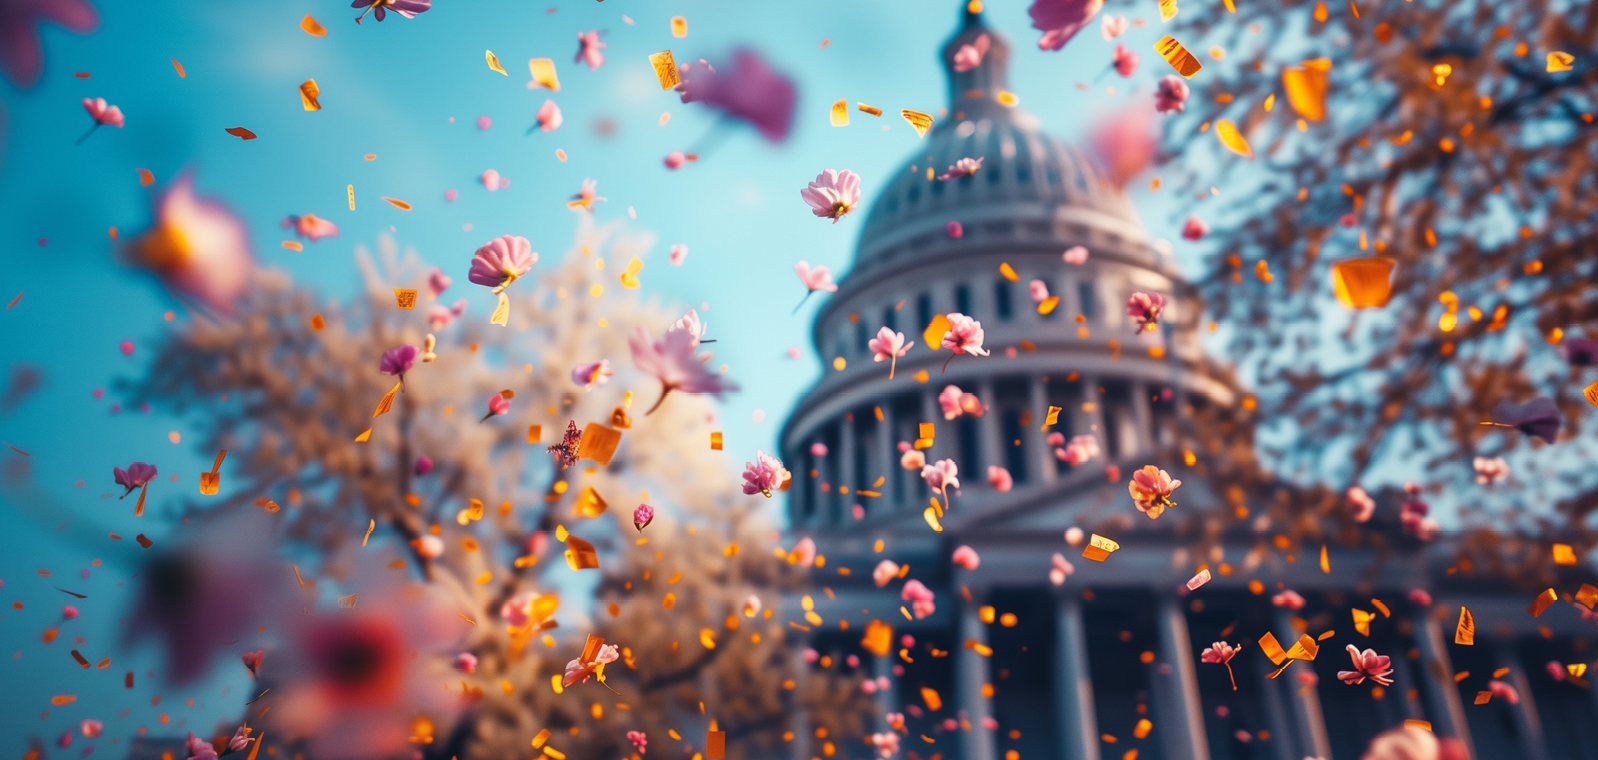 Capital building with flowers all over